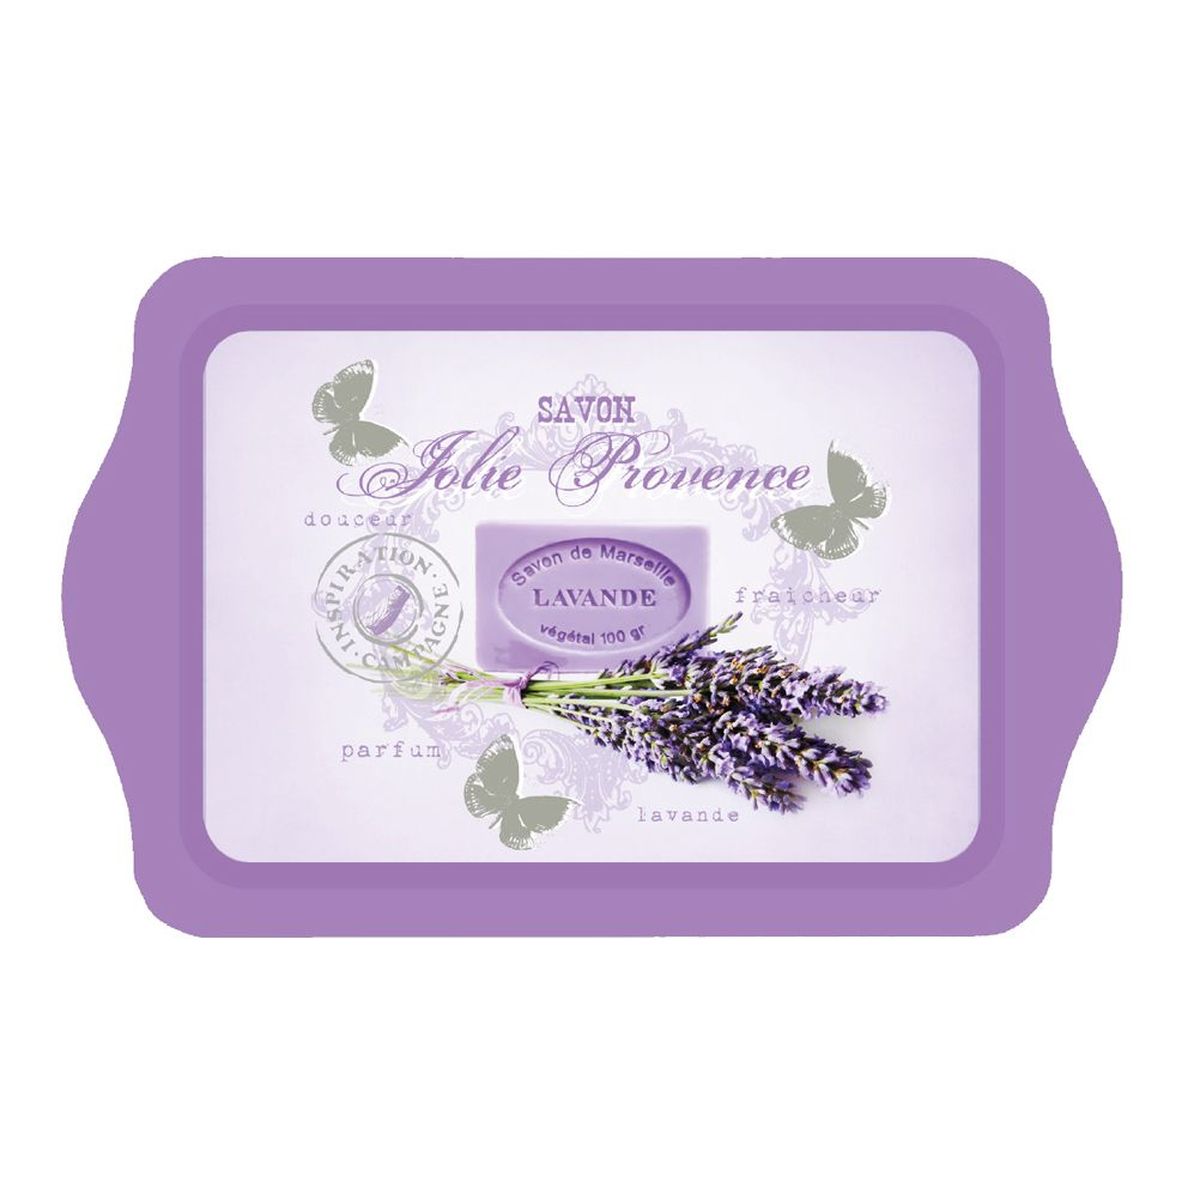 Provence little tray 20 x 14 cm